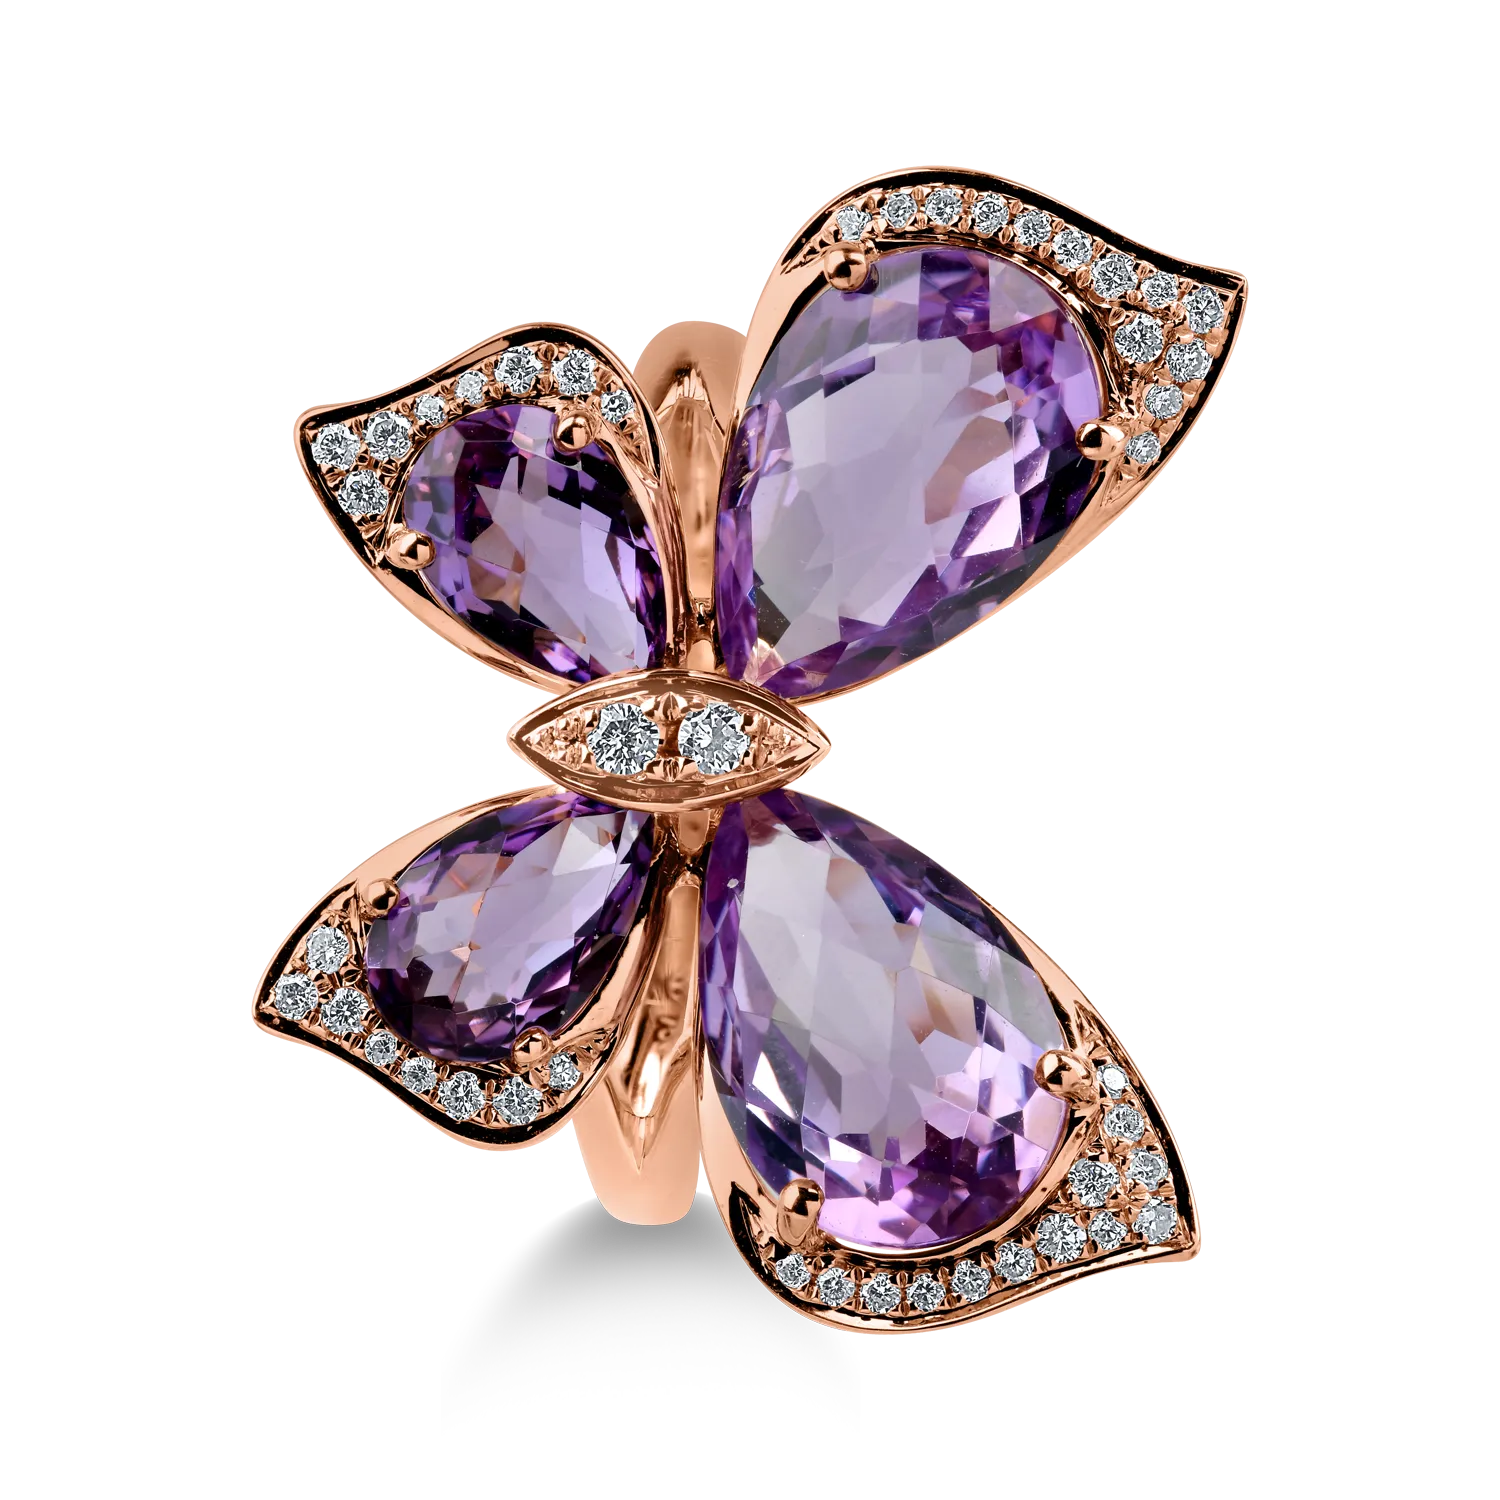 Rose gold butterfly ring with 5.6ct pink amethysts and 0.21ct diamonds